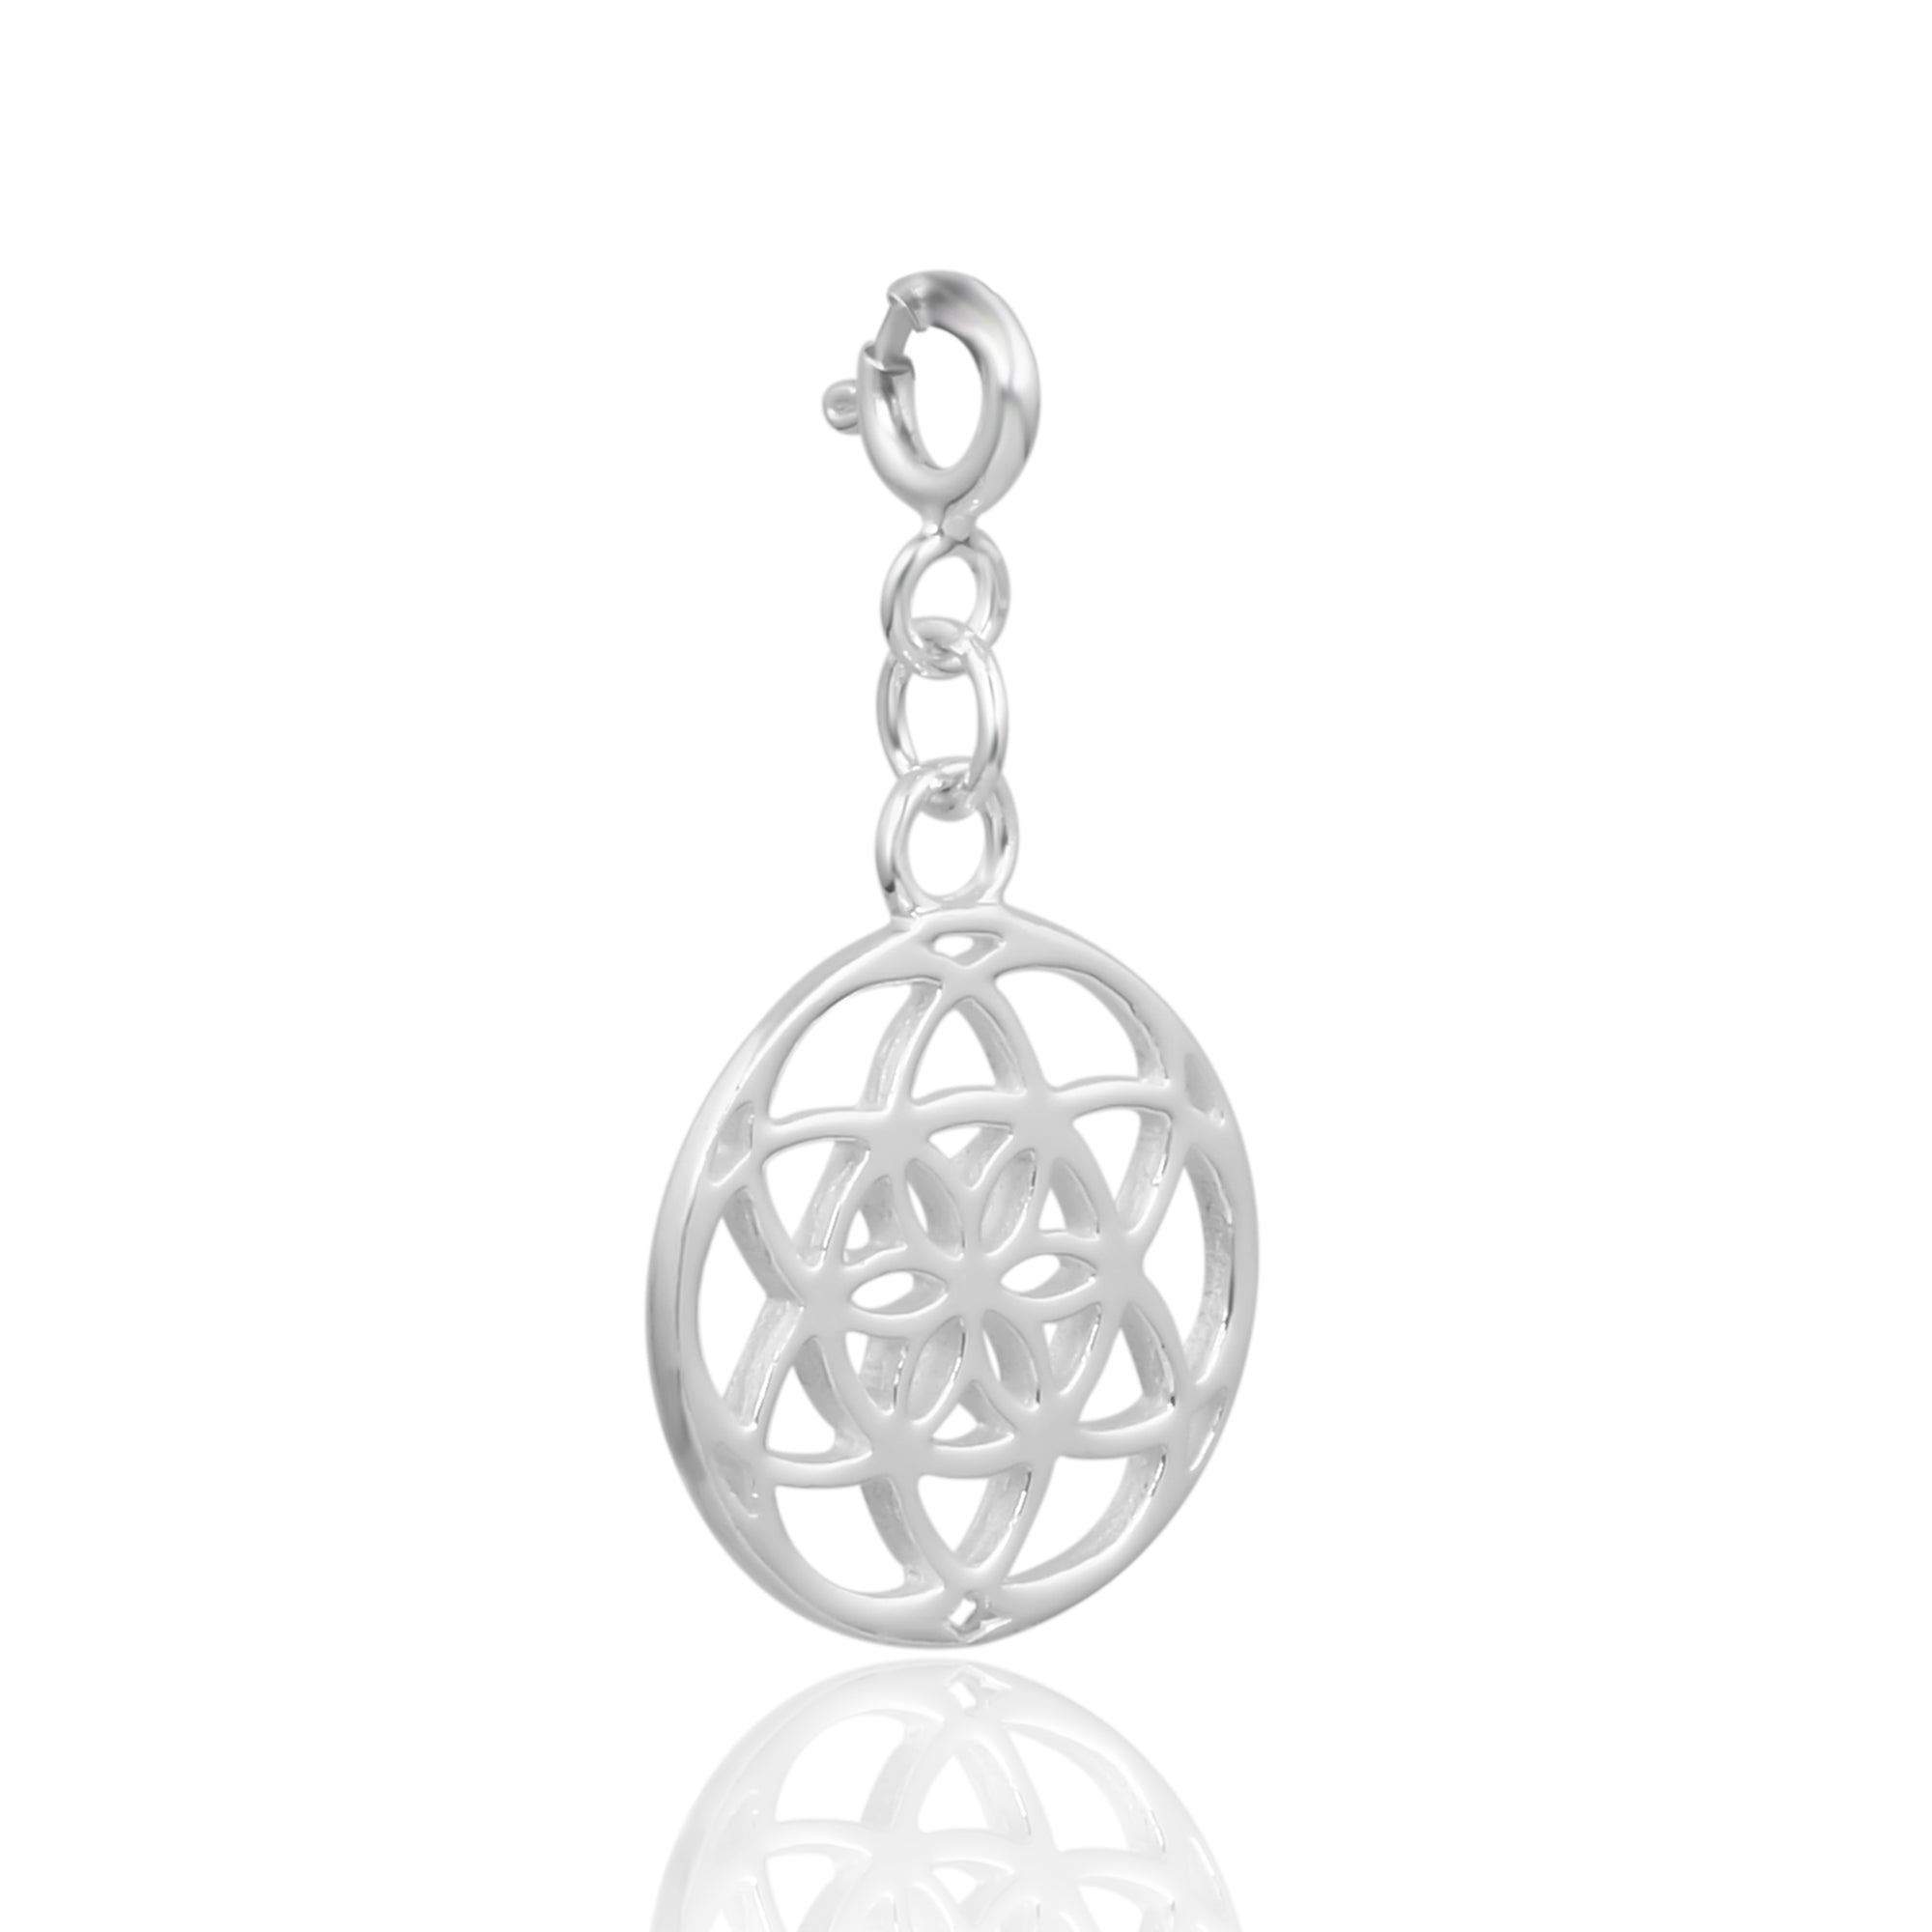 Seed of Life Charm - Silver